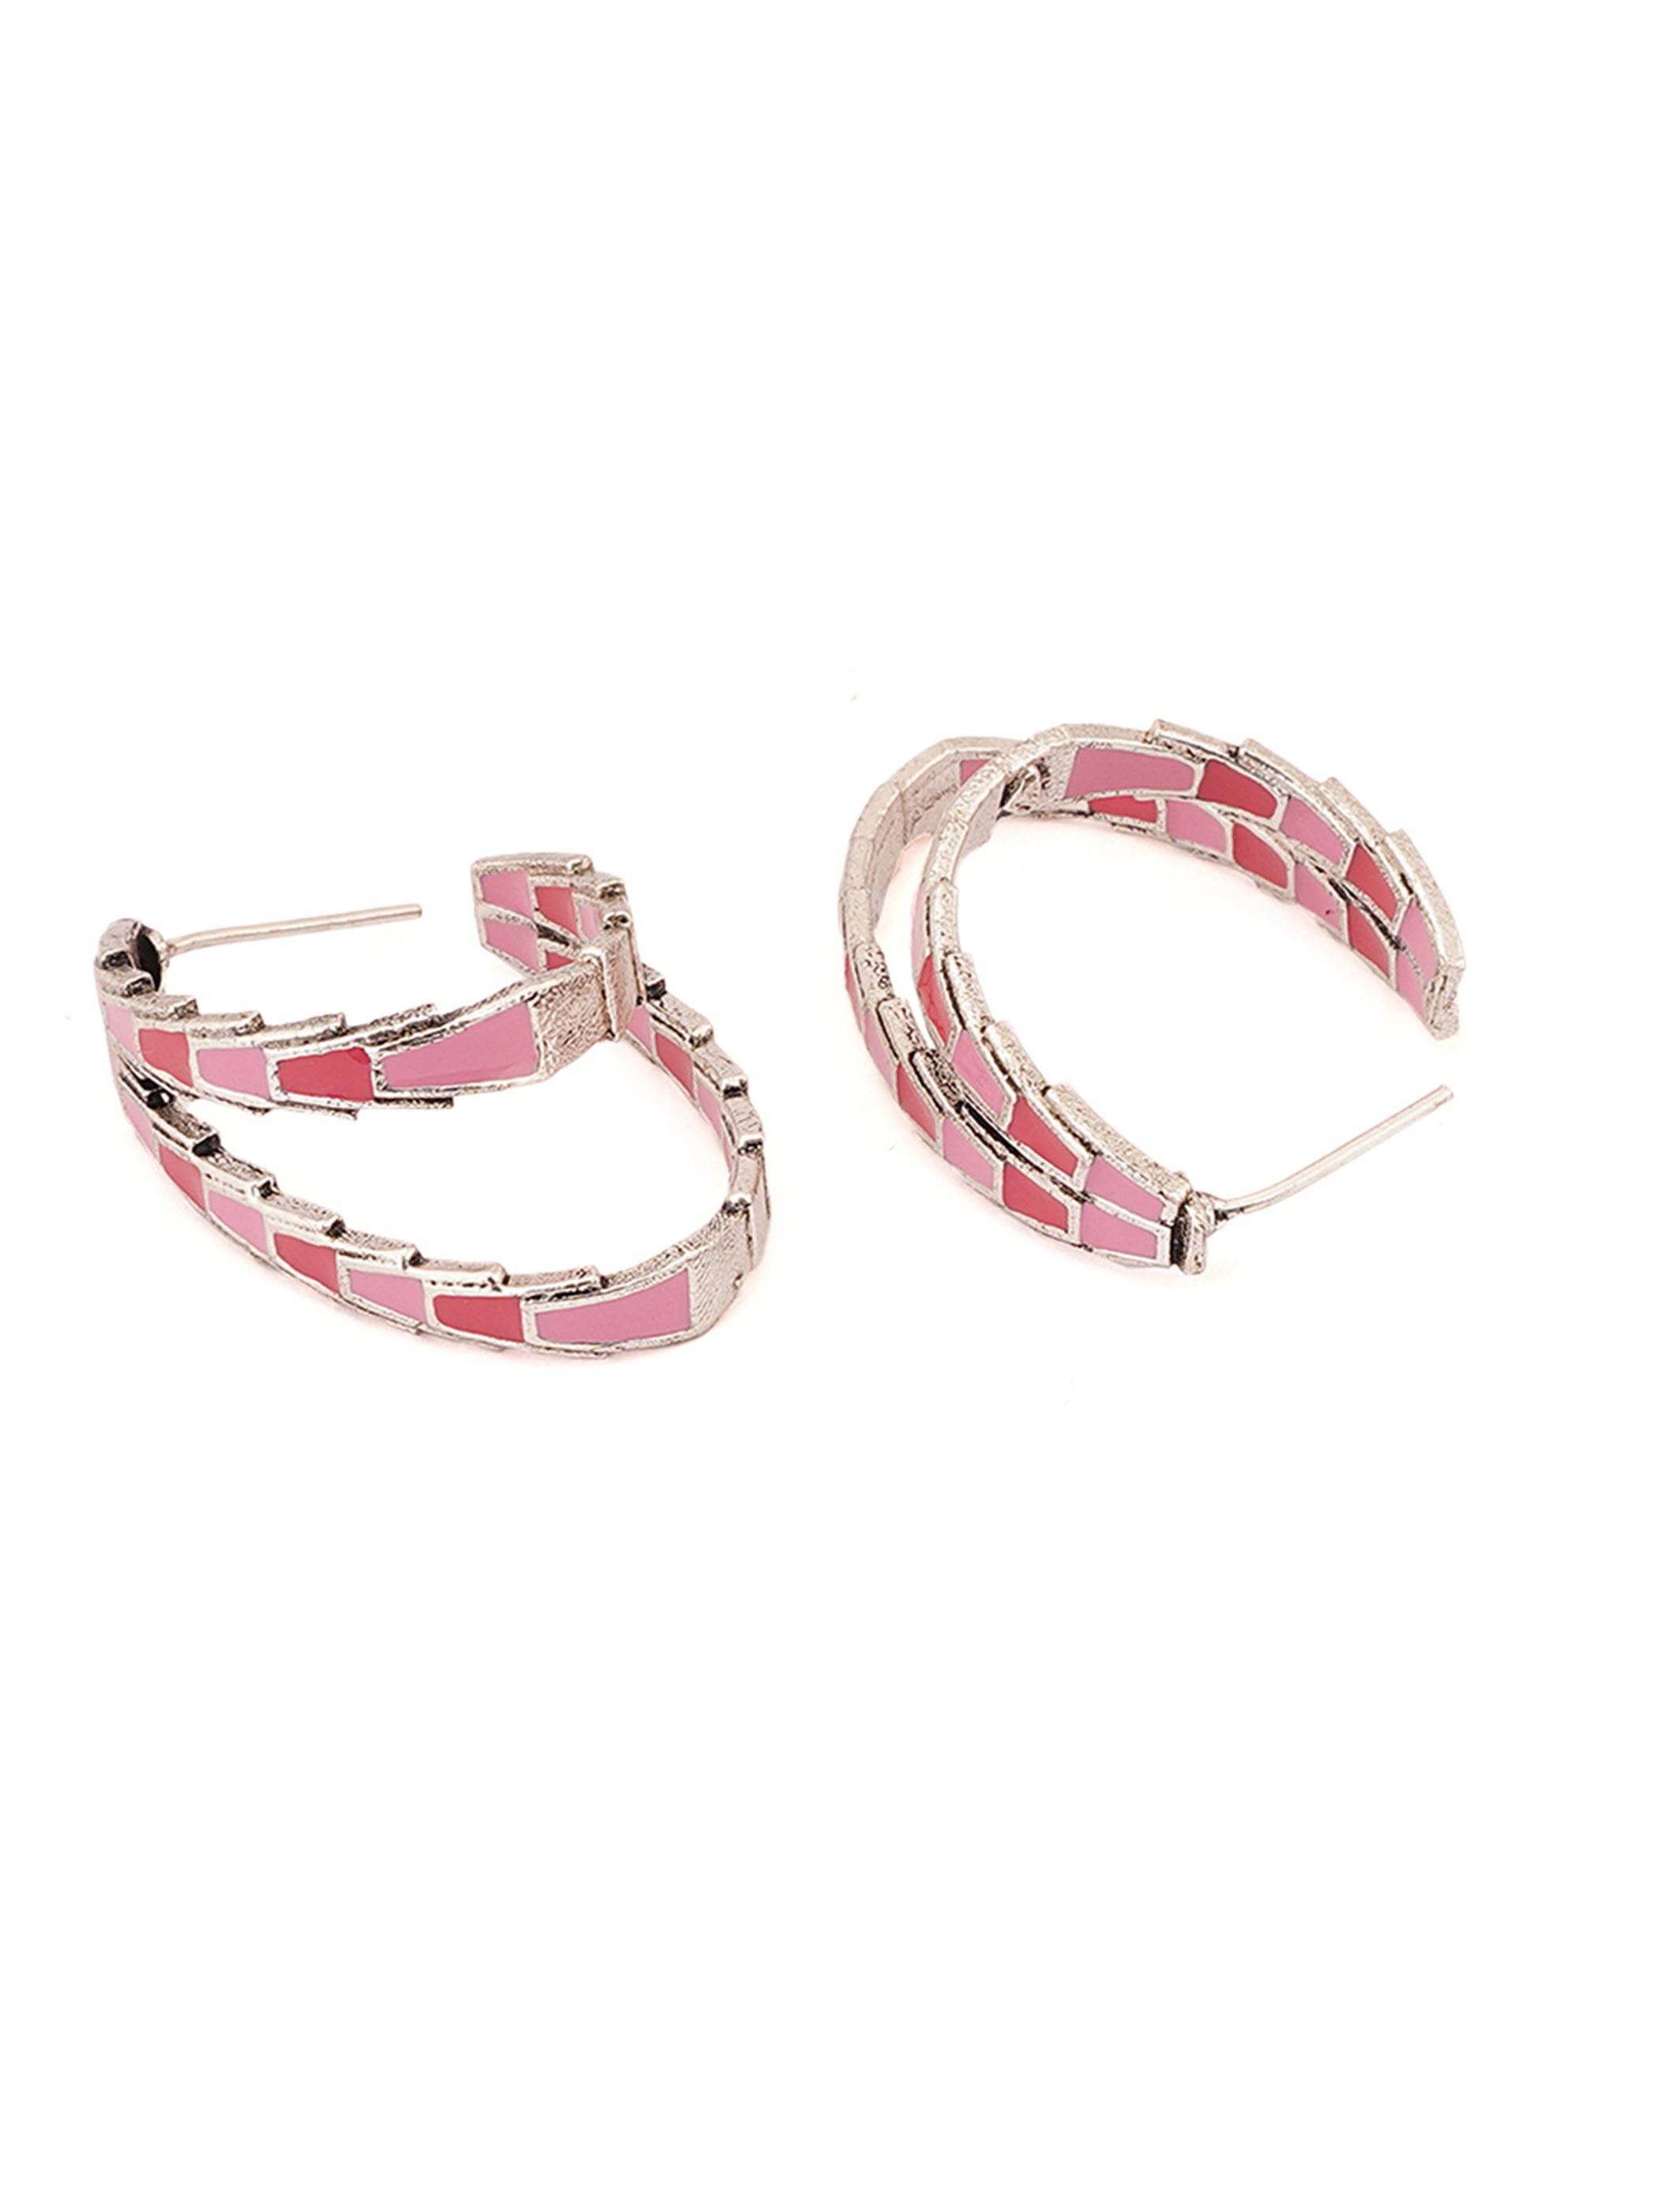 Trendy Hoops Twisted to Perfection Pink Earrings